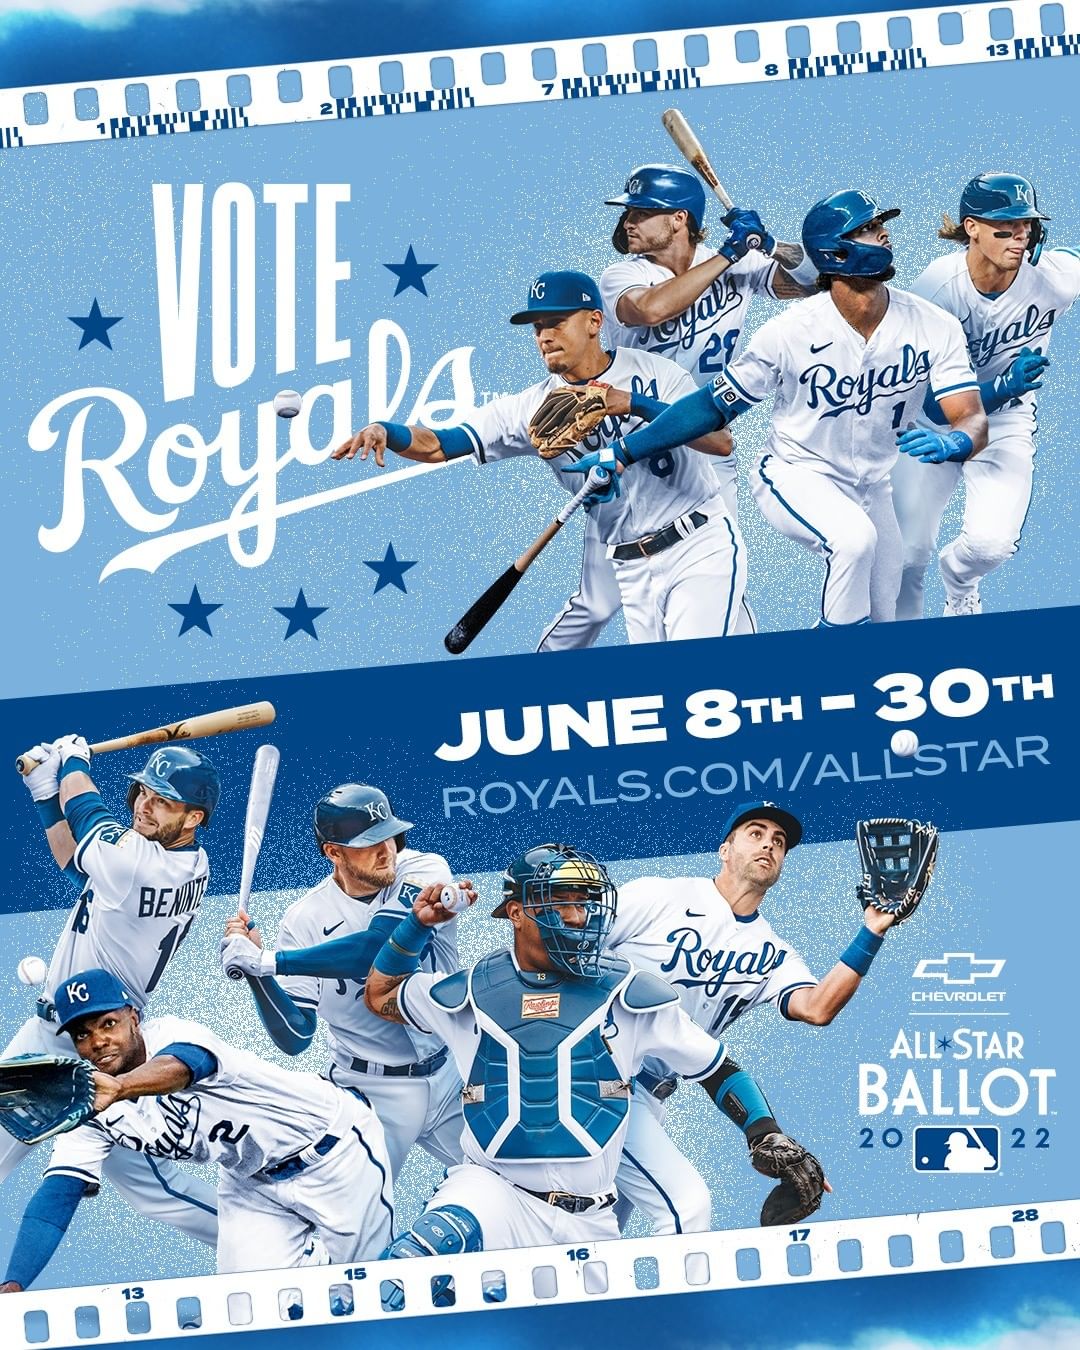 MLB All-Star voting is now open. #VoteRoyals...